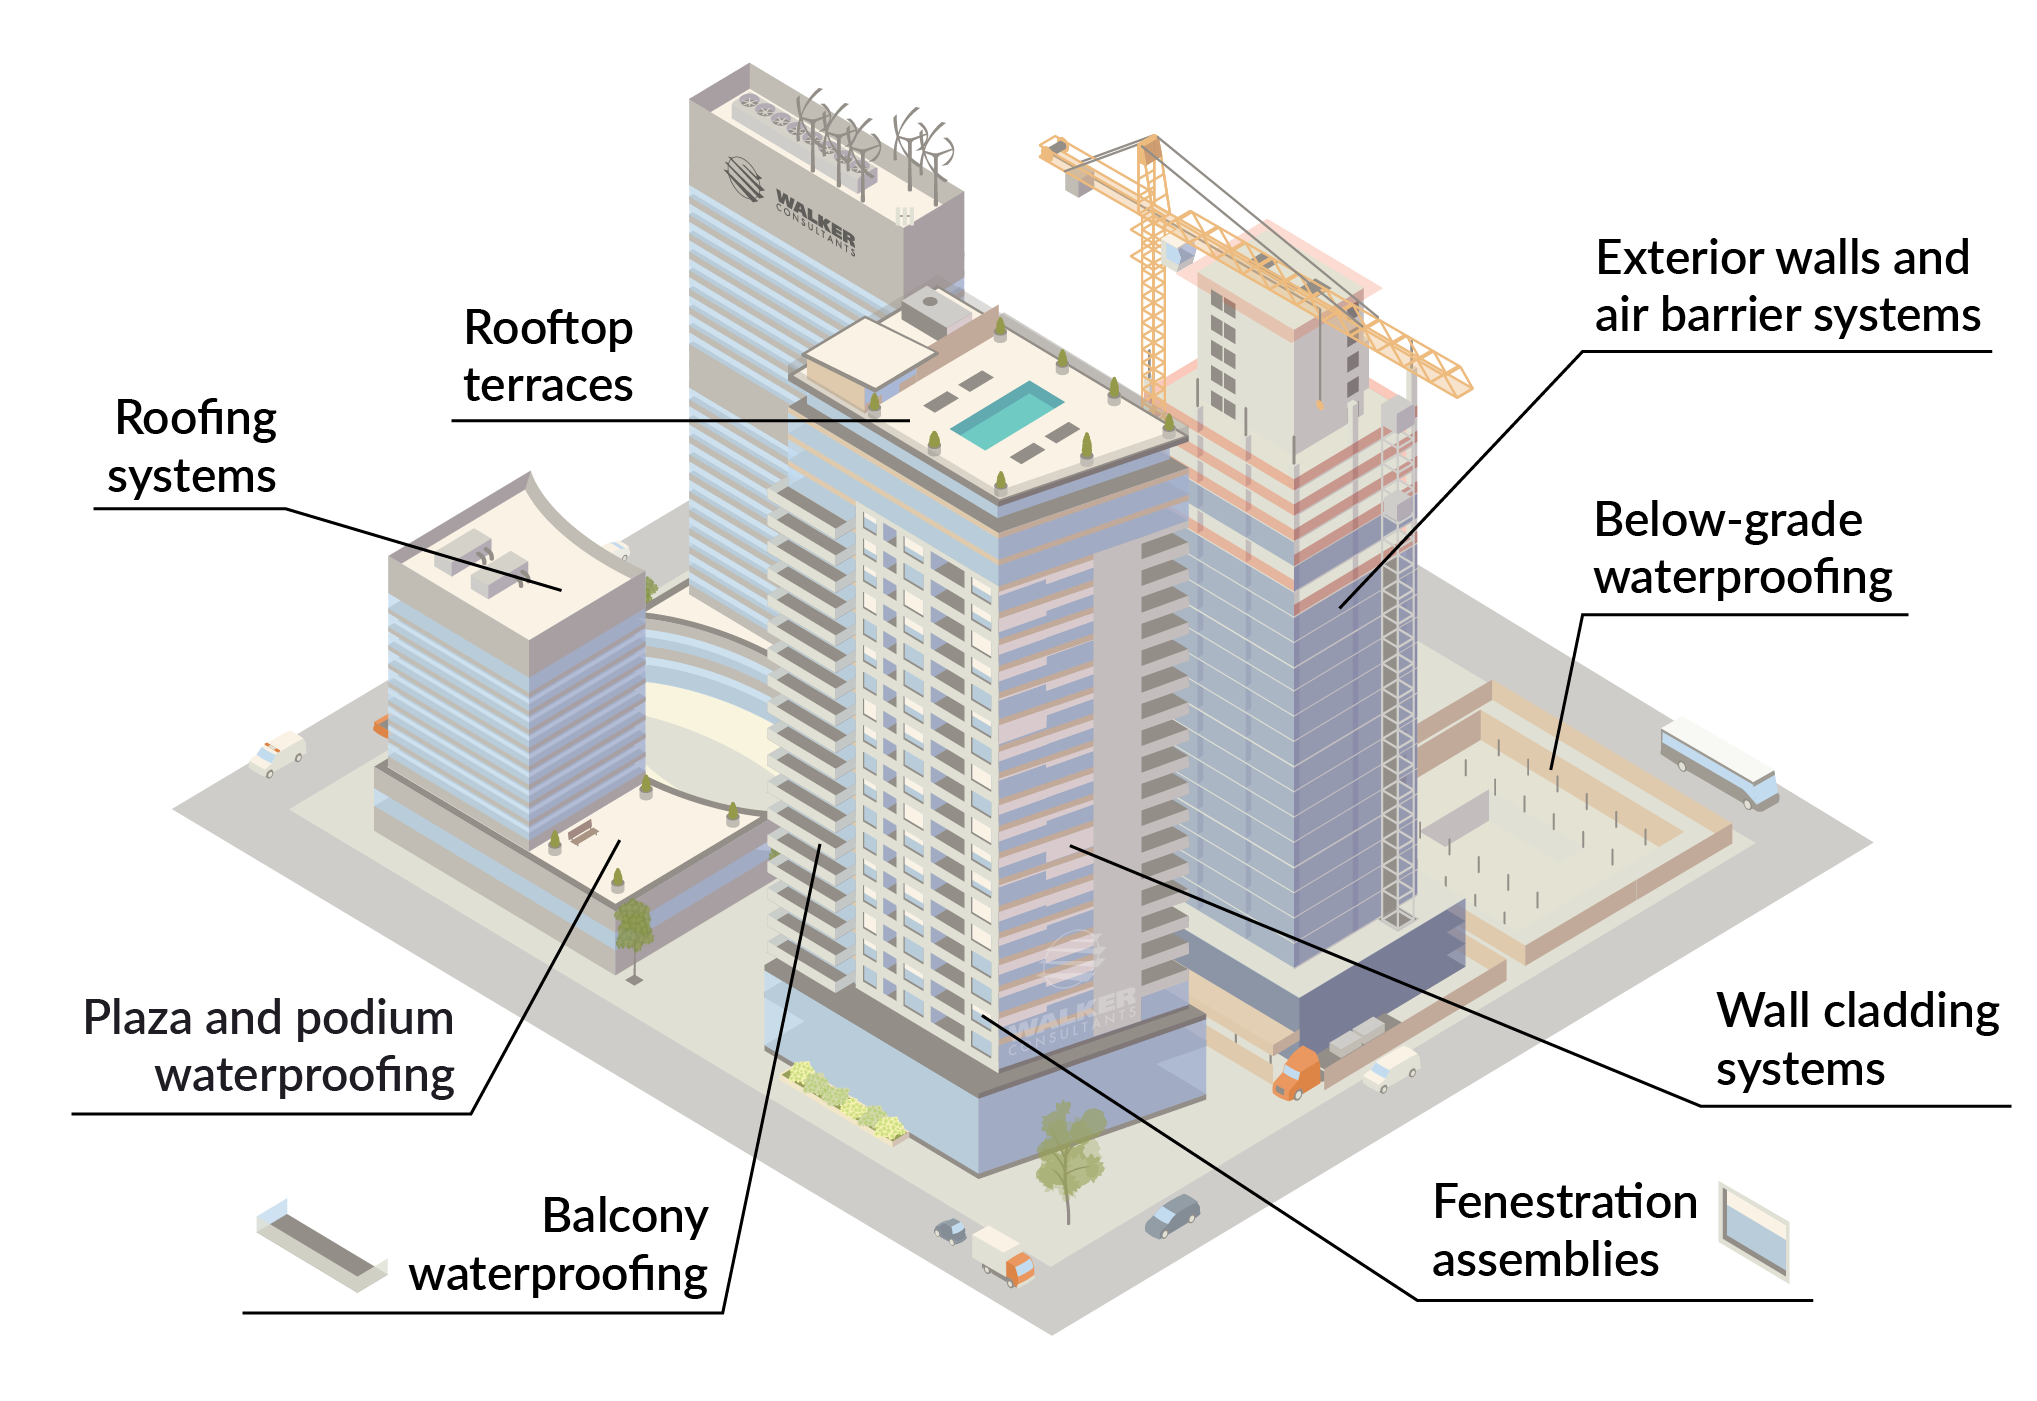 Diagram of several buildings on a city block with parts of the building envelope labeled